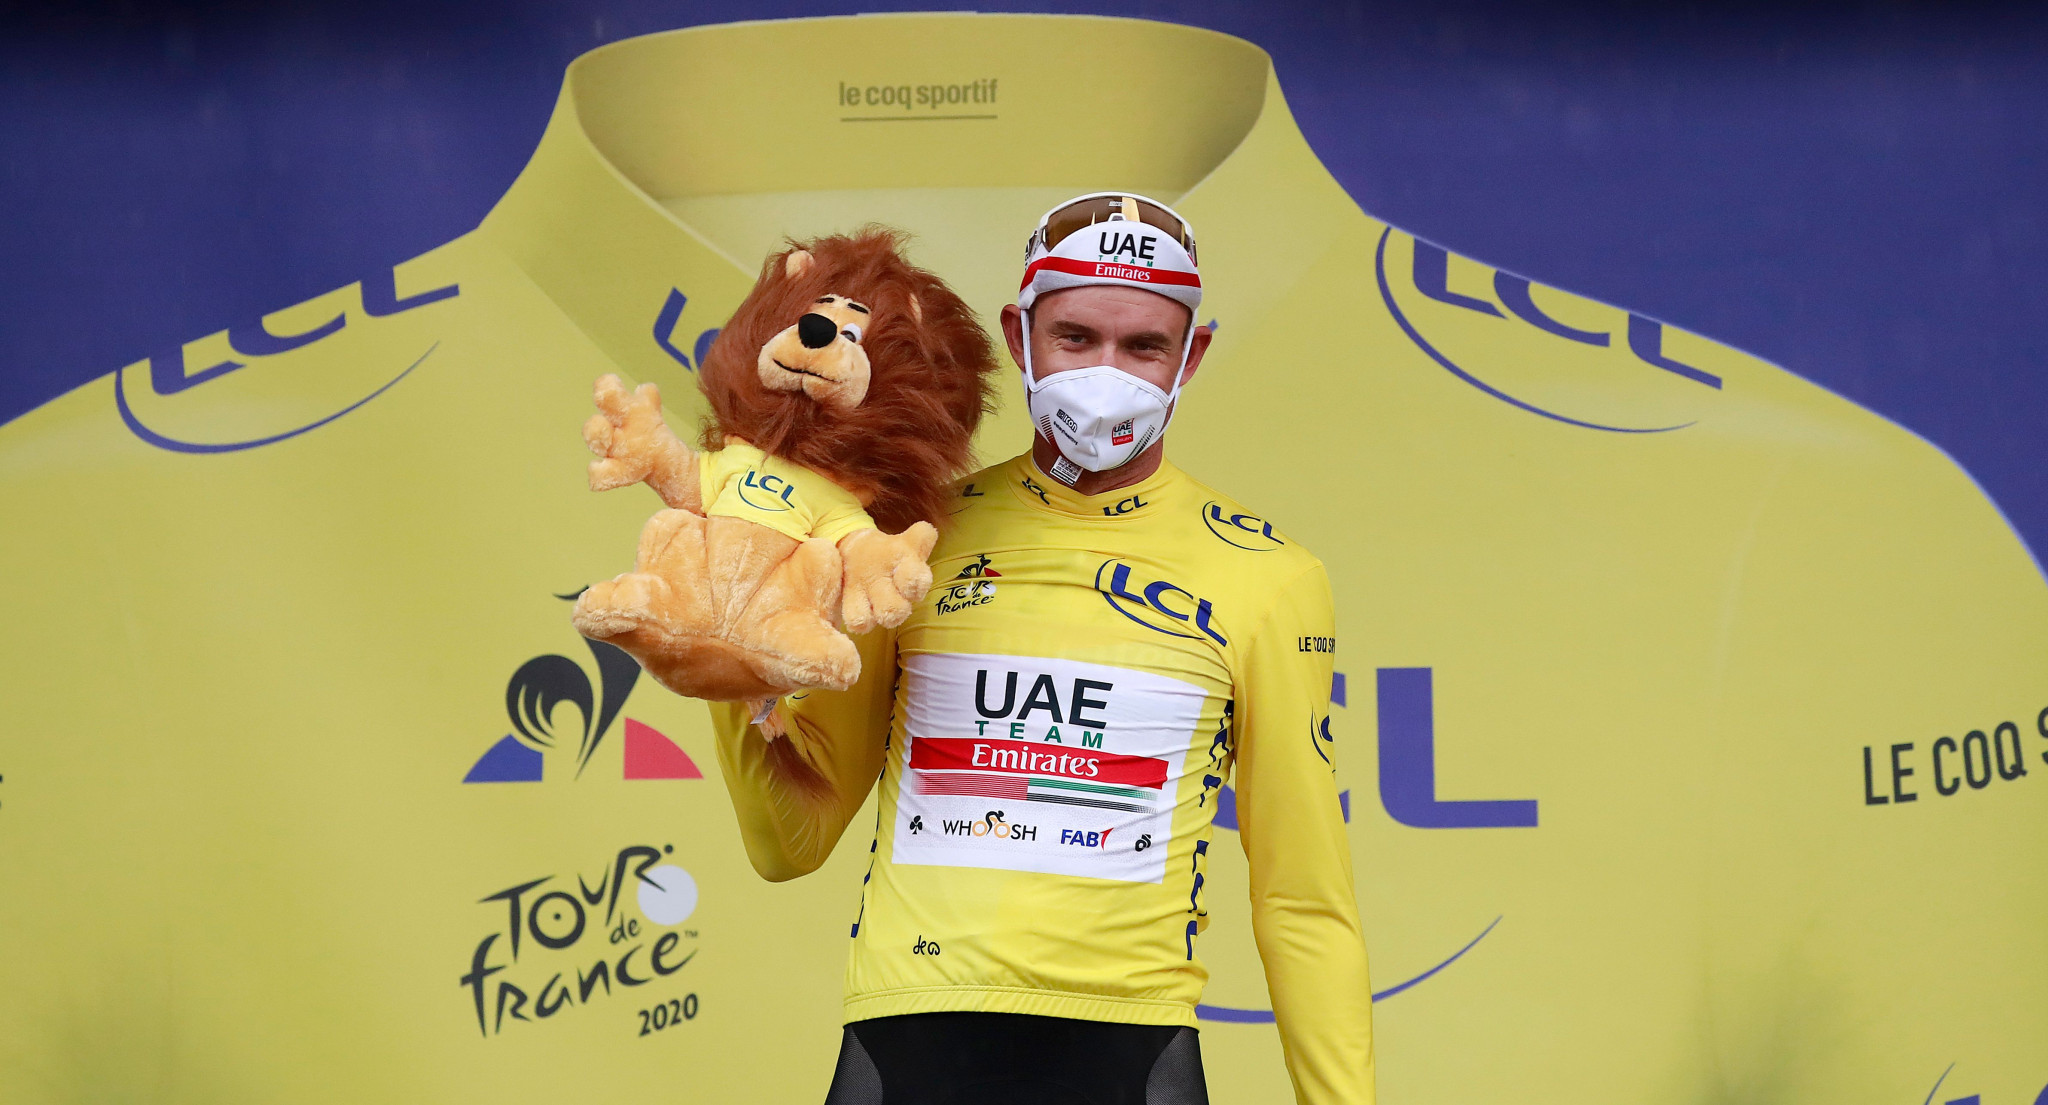 Alexander Kristoff claimed the first yellow jersey of the 2020 Tour de France ©Getty Images